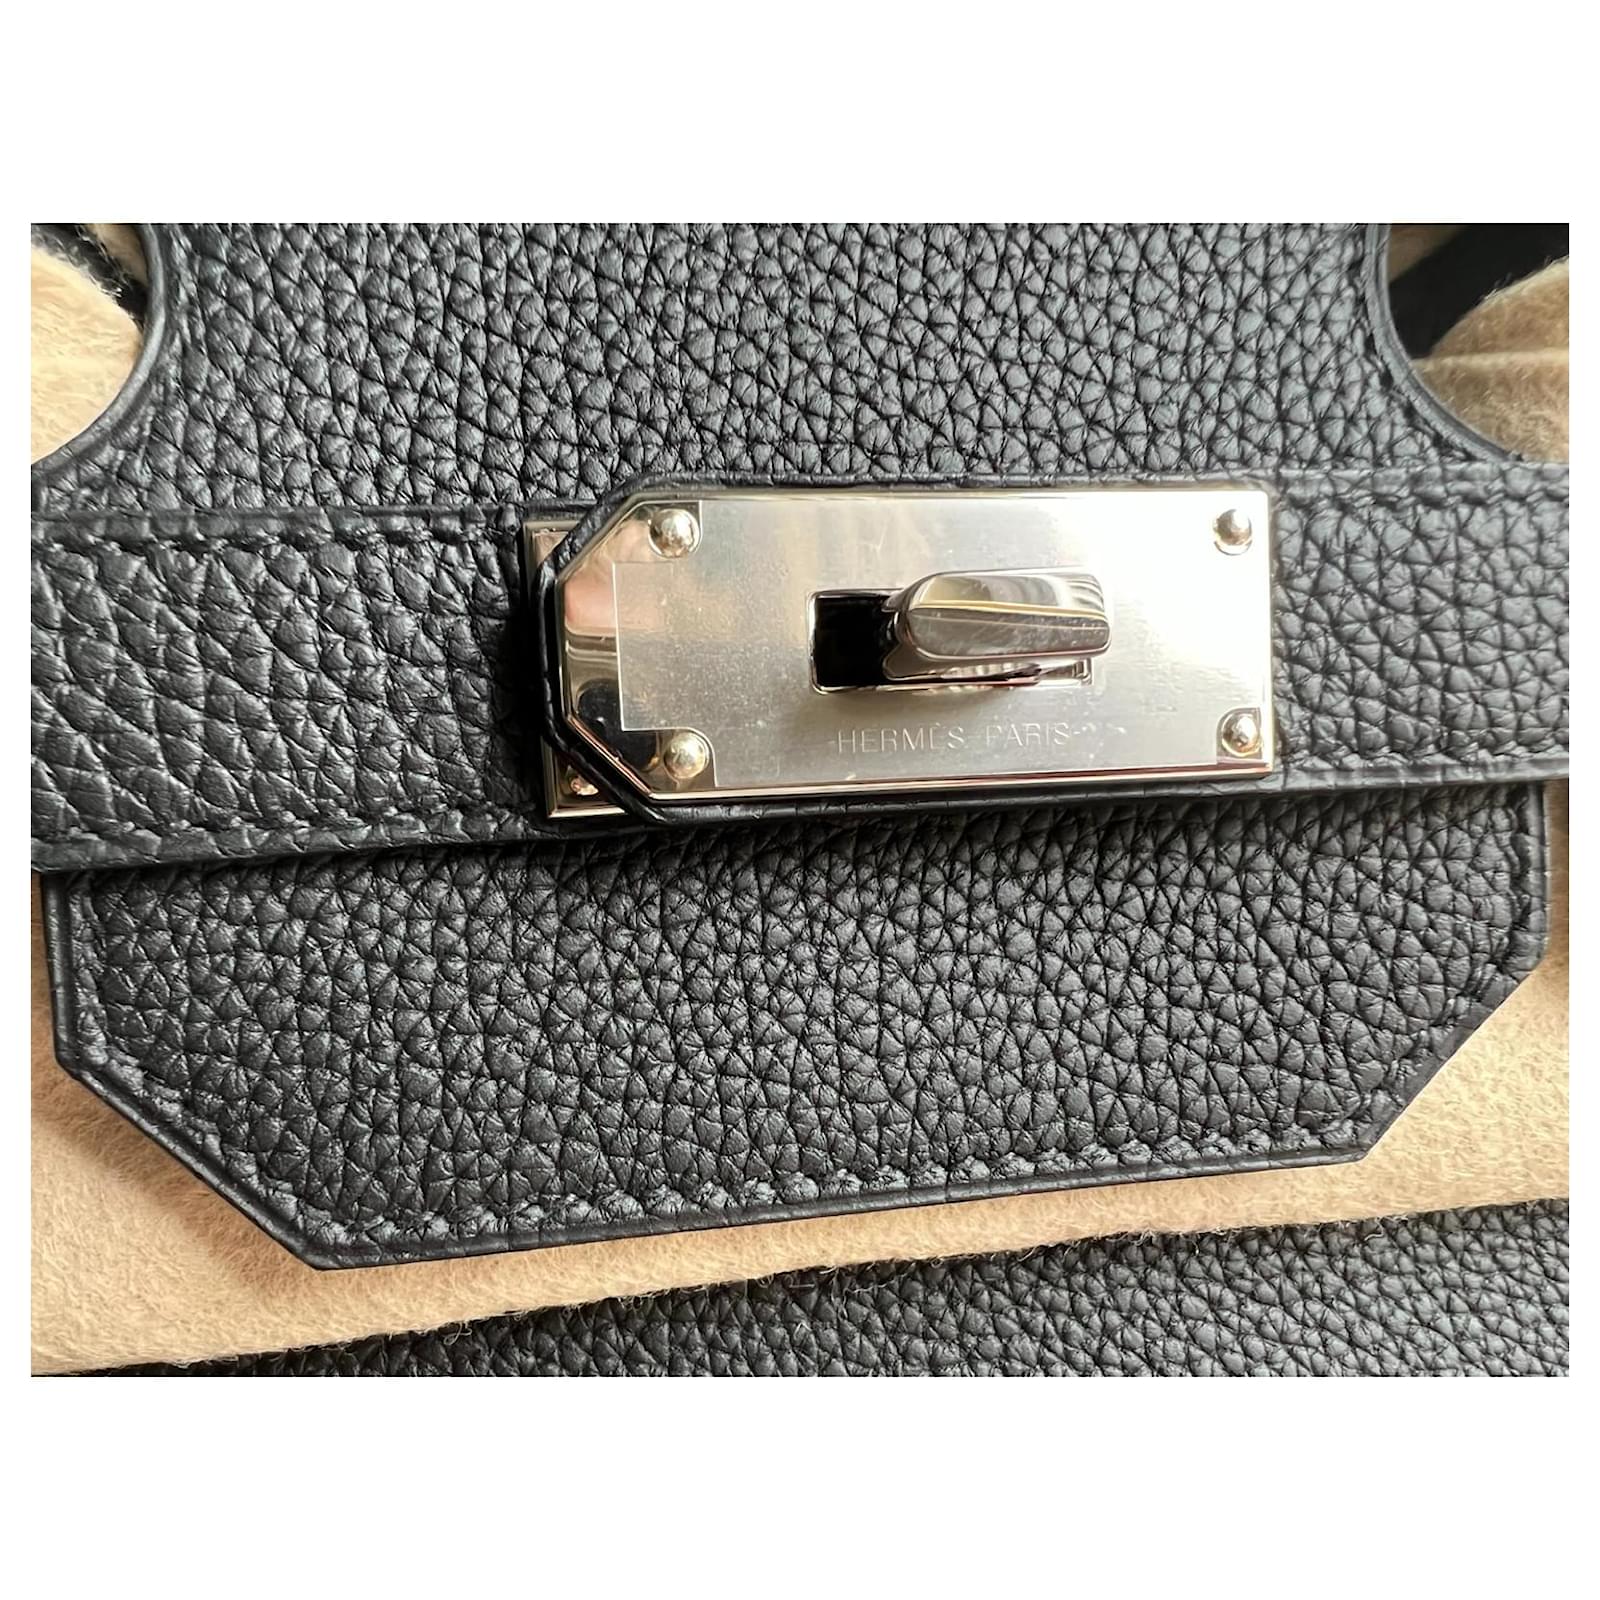 Hermes Haut a Courroies 40 Black Togo leather Silver hardware